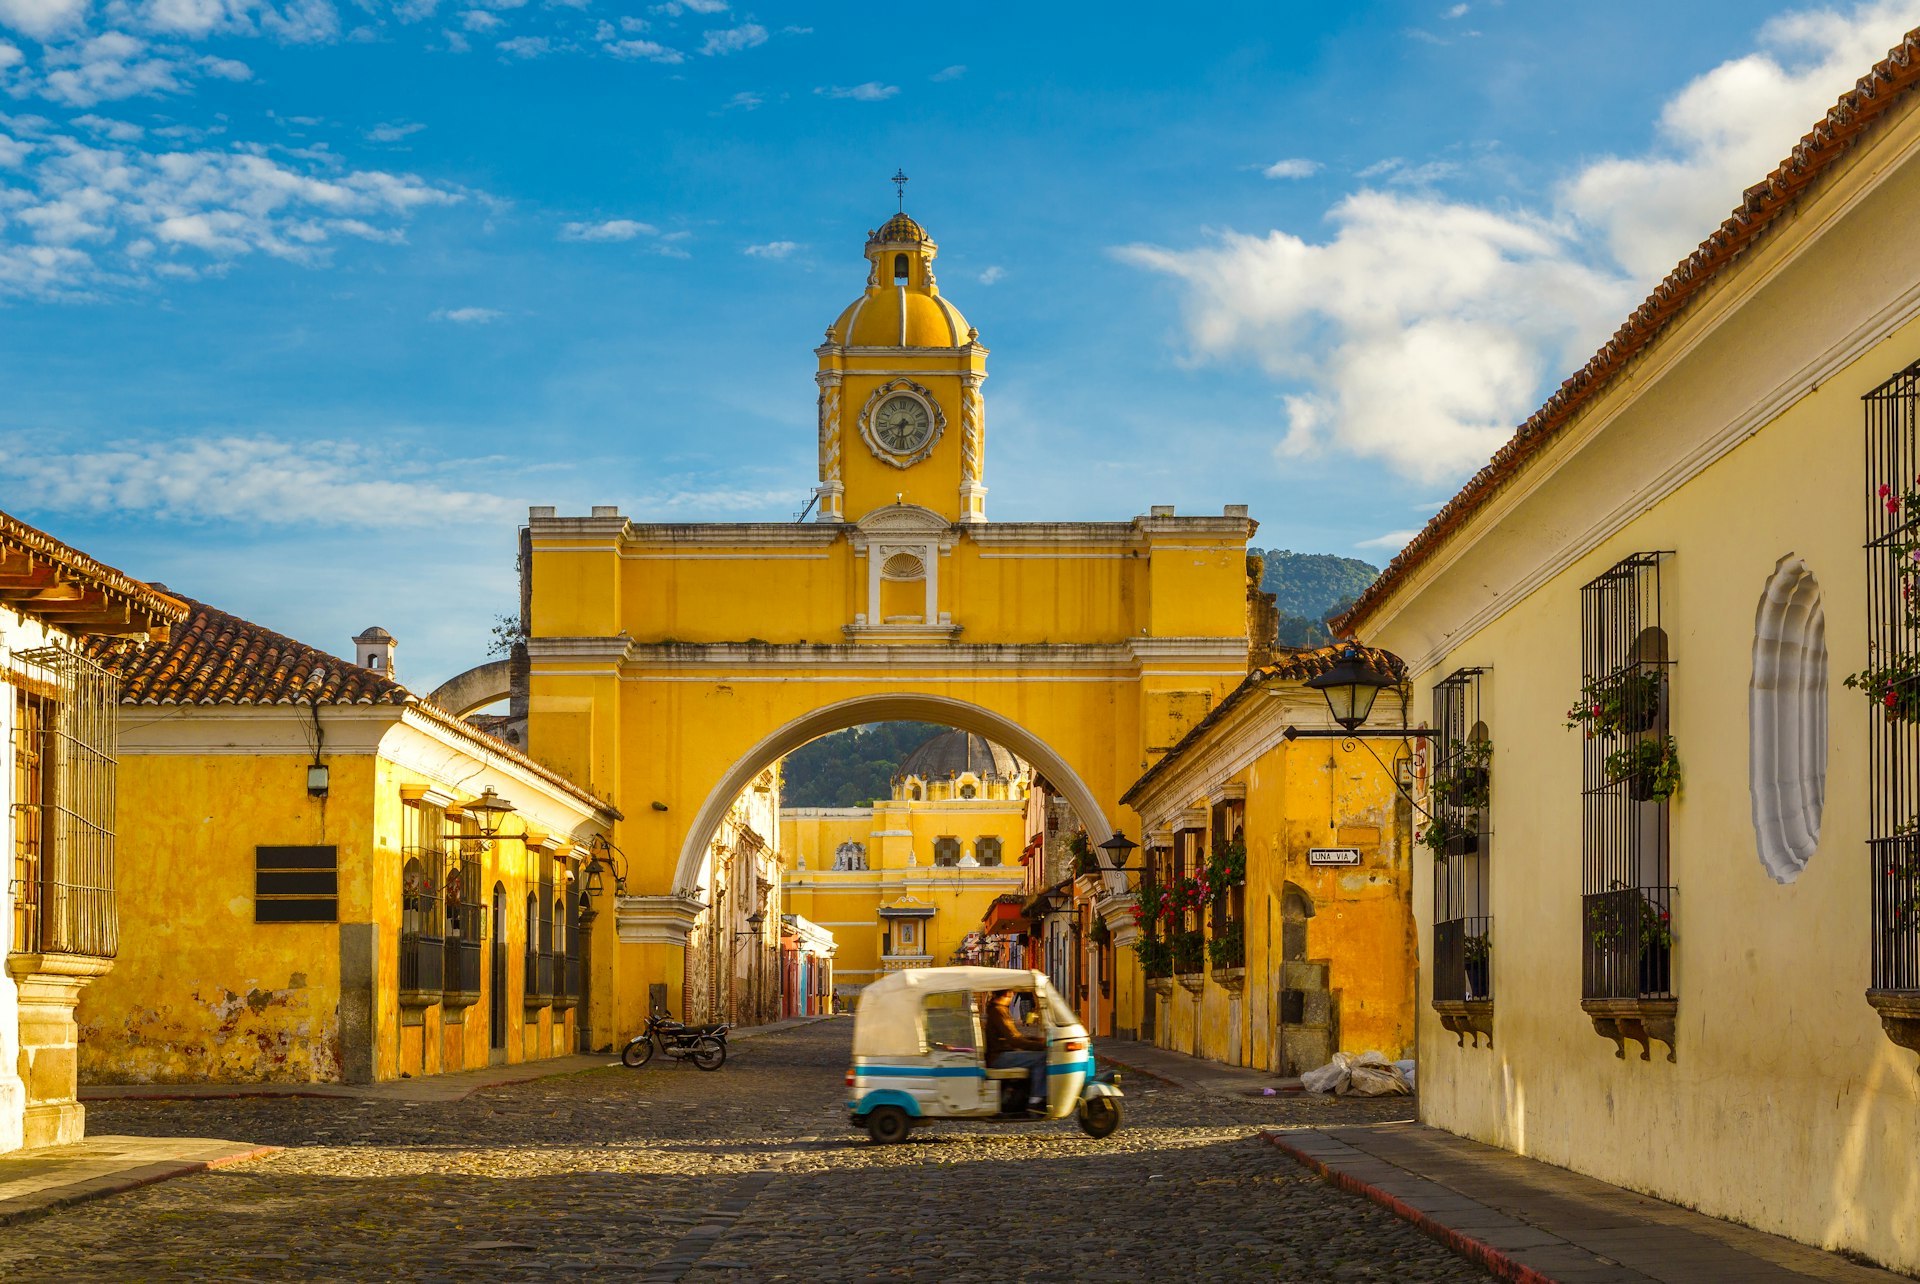 A tuk-tuk taxi passes in from of The Arch of Santa Catalina in Antigua, Guatemala